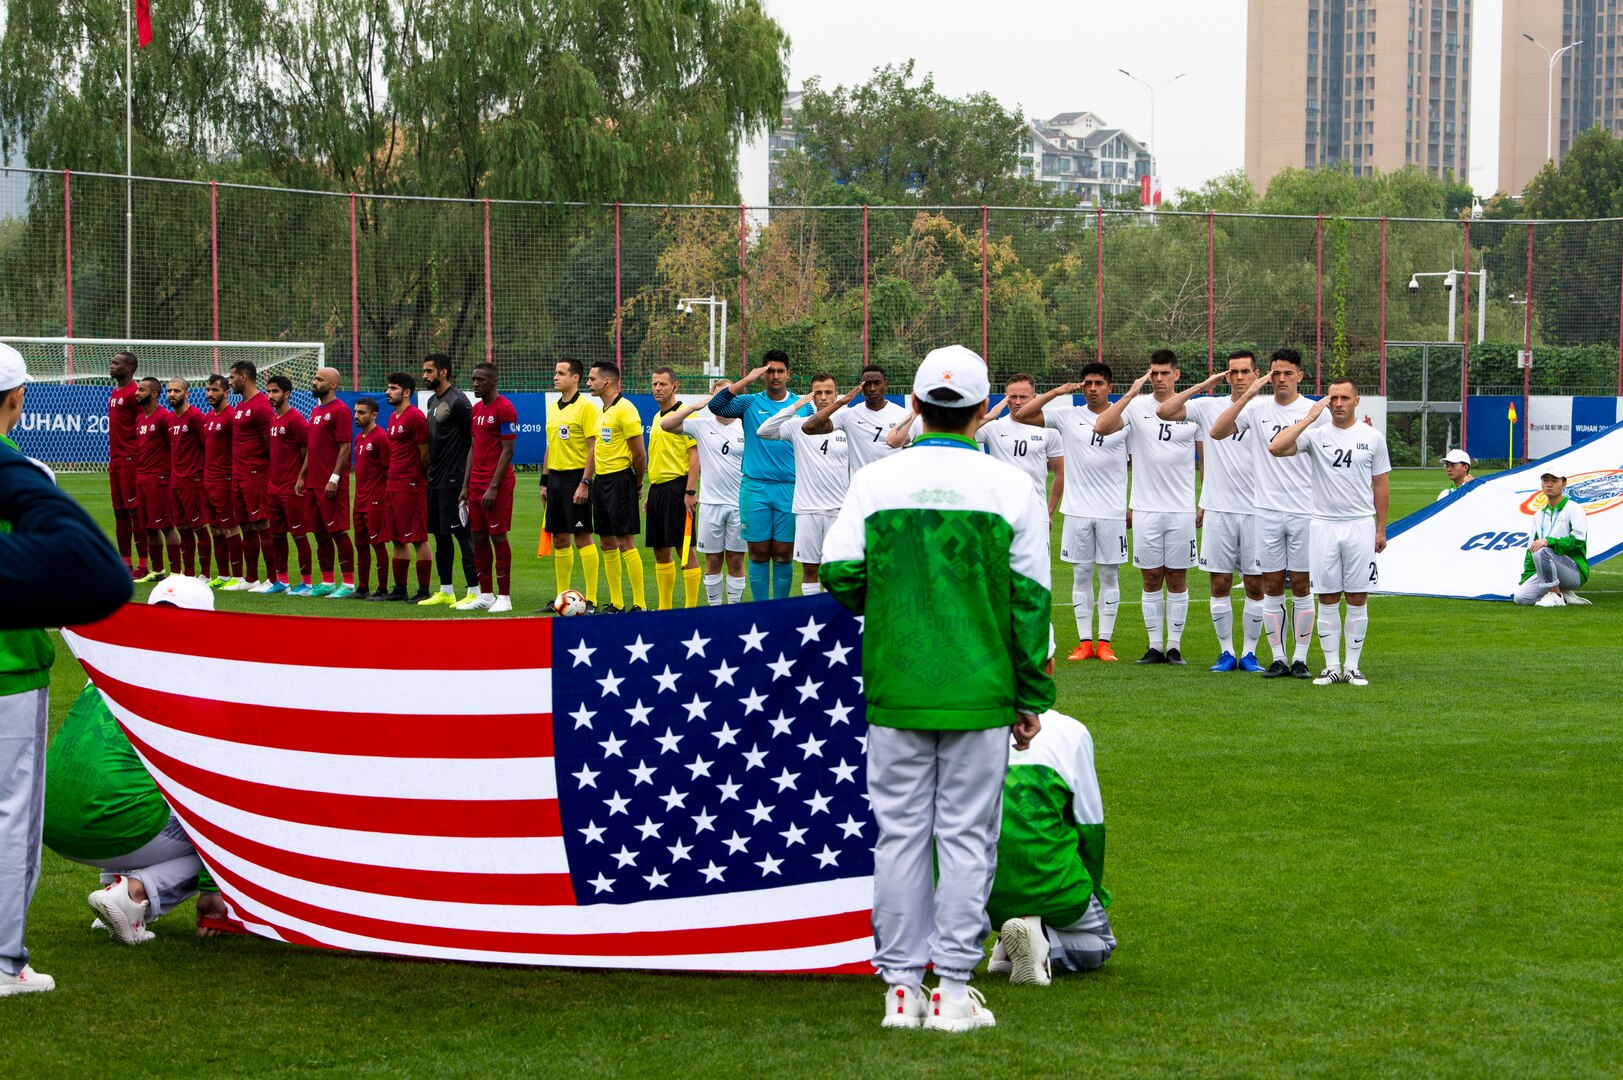 The U.S. Armed Forces Men’s Soccer Team salutes the flag during the National Anthem prior to  their match against Qatar in their first preliminary round of the CISM 2019 Military World Games in Wuhan, China Oct. 16, 2019. The Council of International Sports for the Military games open Oct. 18, 2019 and close Oct. 28, 2019. (DoD photo by Mass Communication Specialist 1st Class Ian Carver/RELEASED)